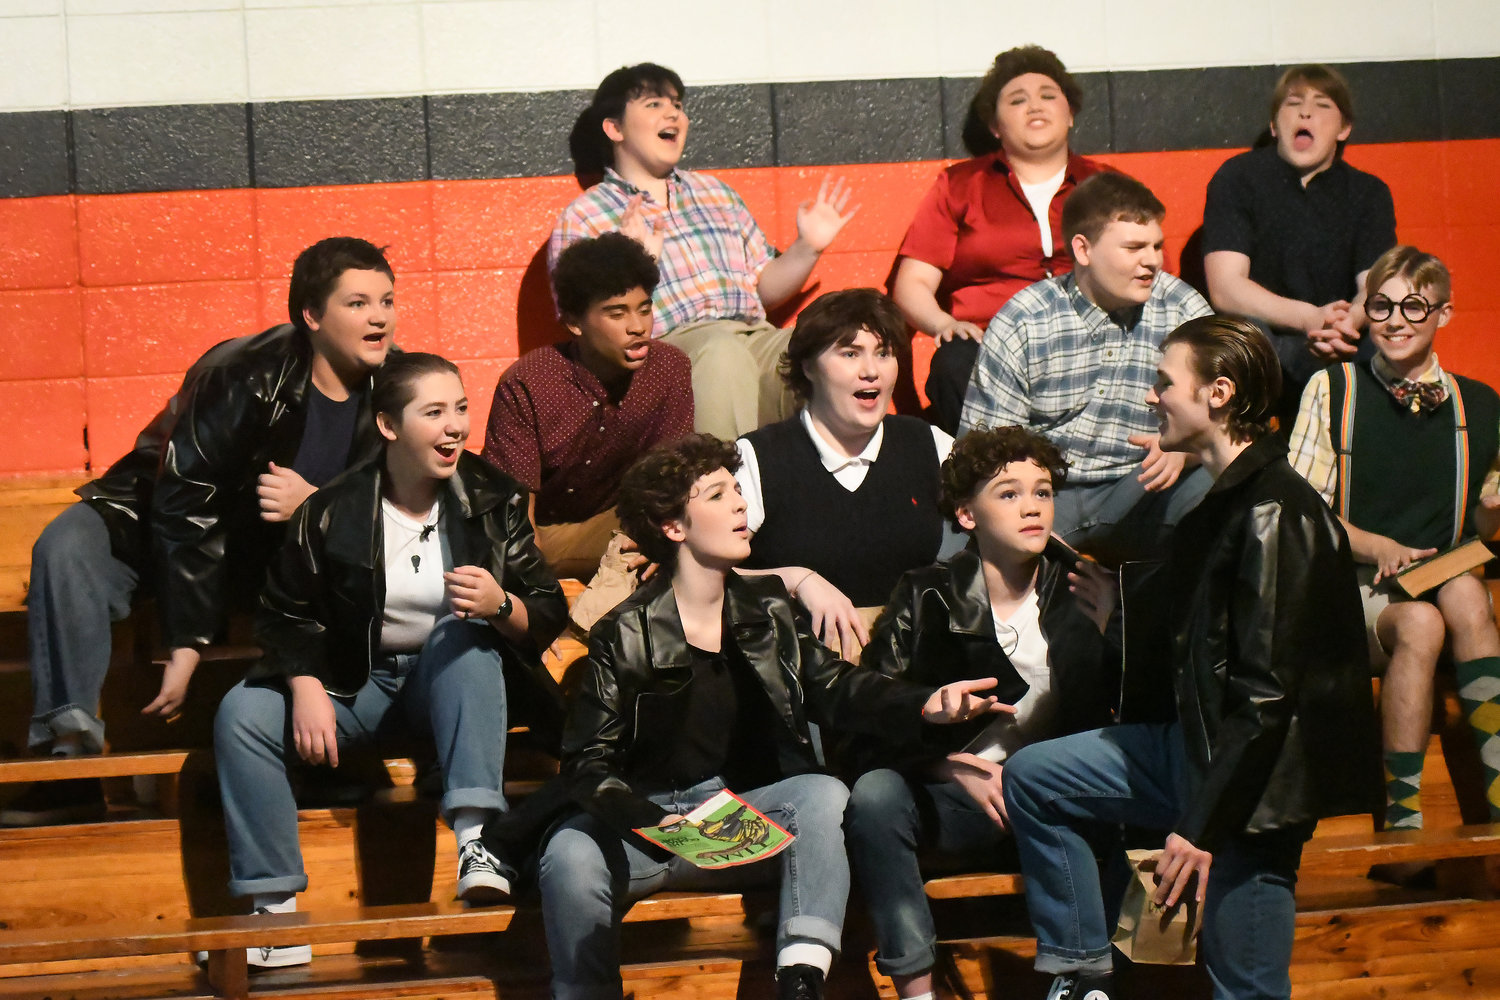 Owensville High School’s Drama Department held dress rehearsal Monday for their scheduled three shows this week of “Grease.”